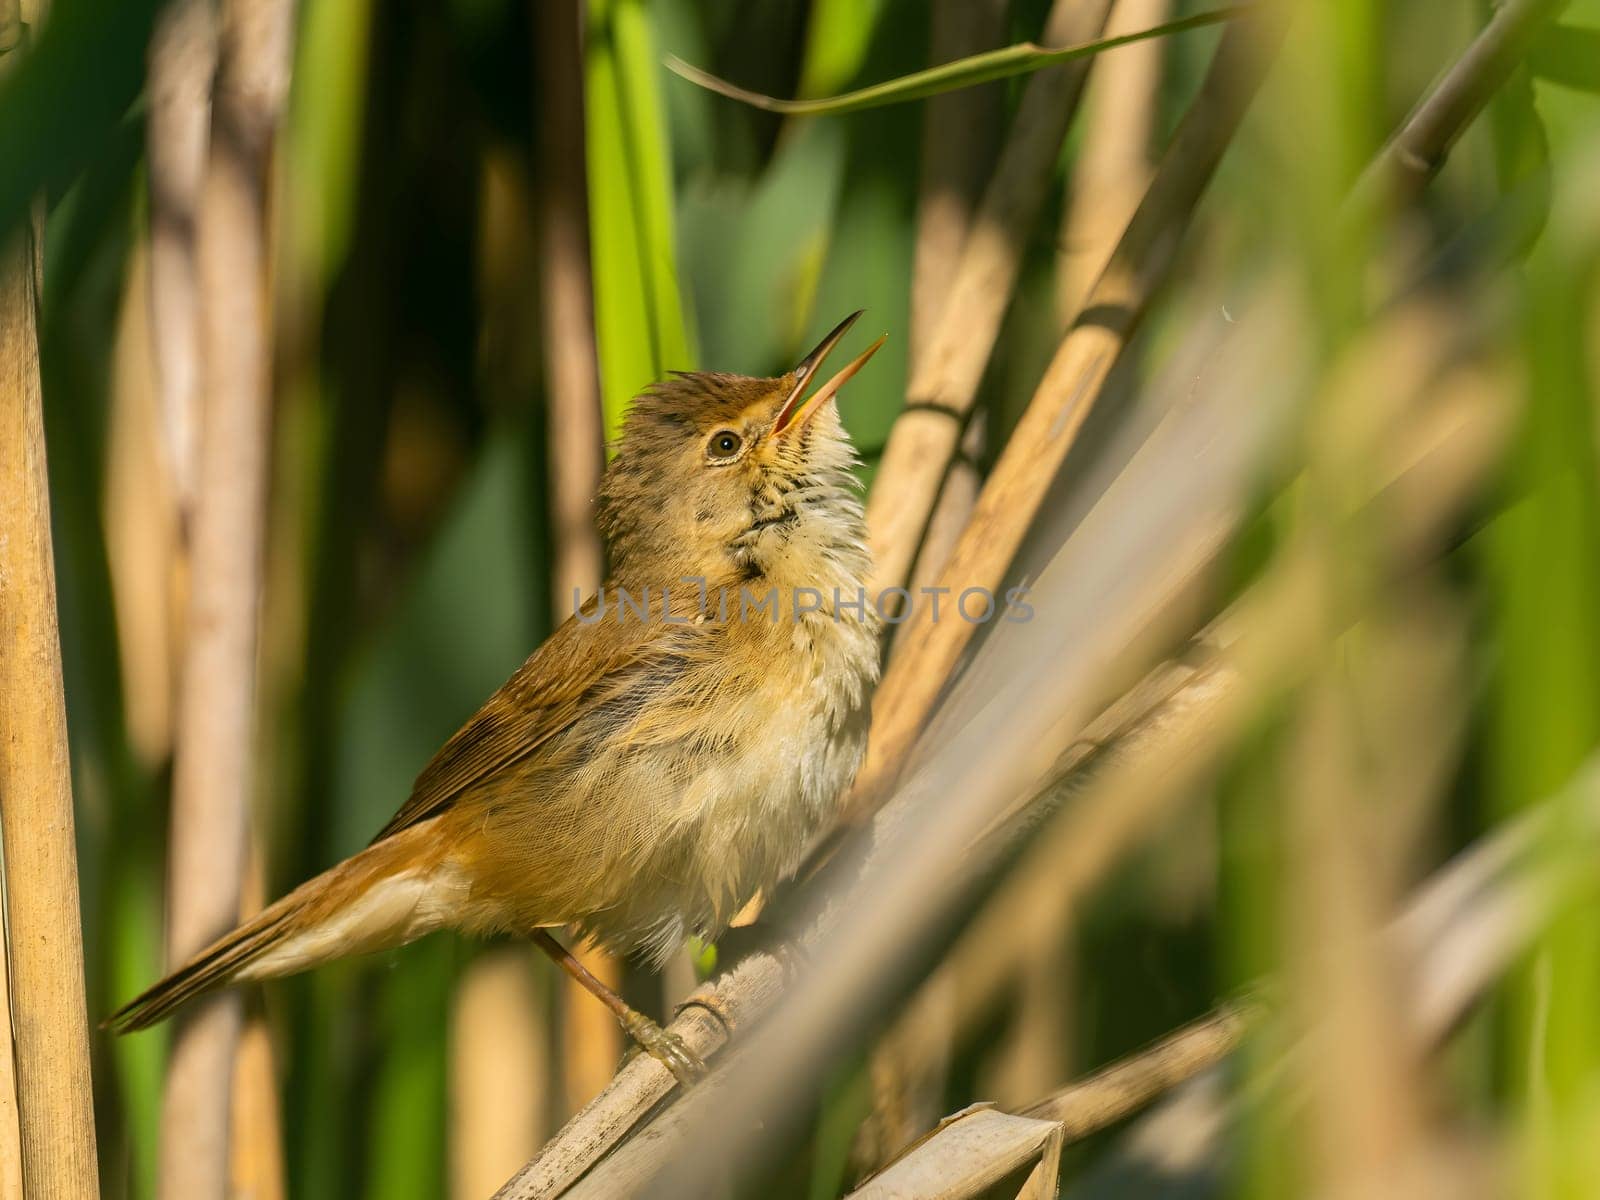 A Common Reed Warbler sits gracefully on a swaying reed in a vibrant green setting, blending harmoniously with its natural habitat.